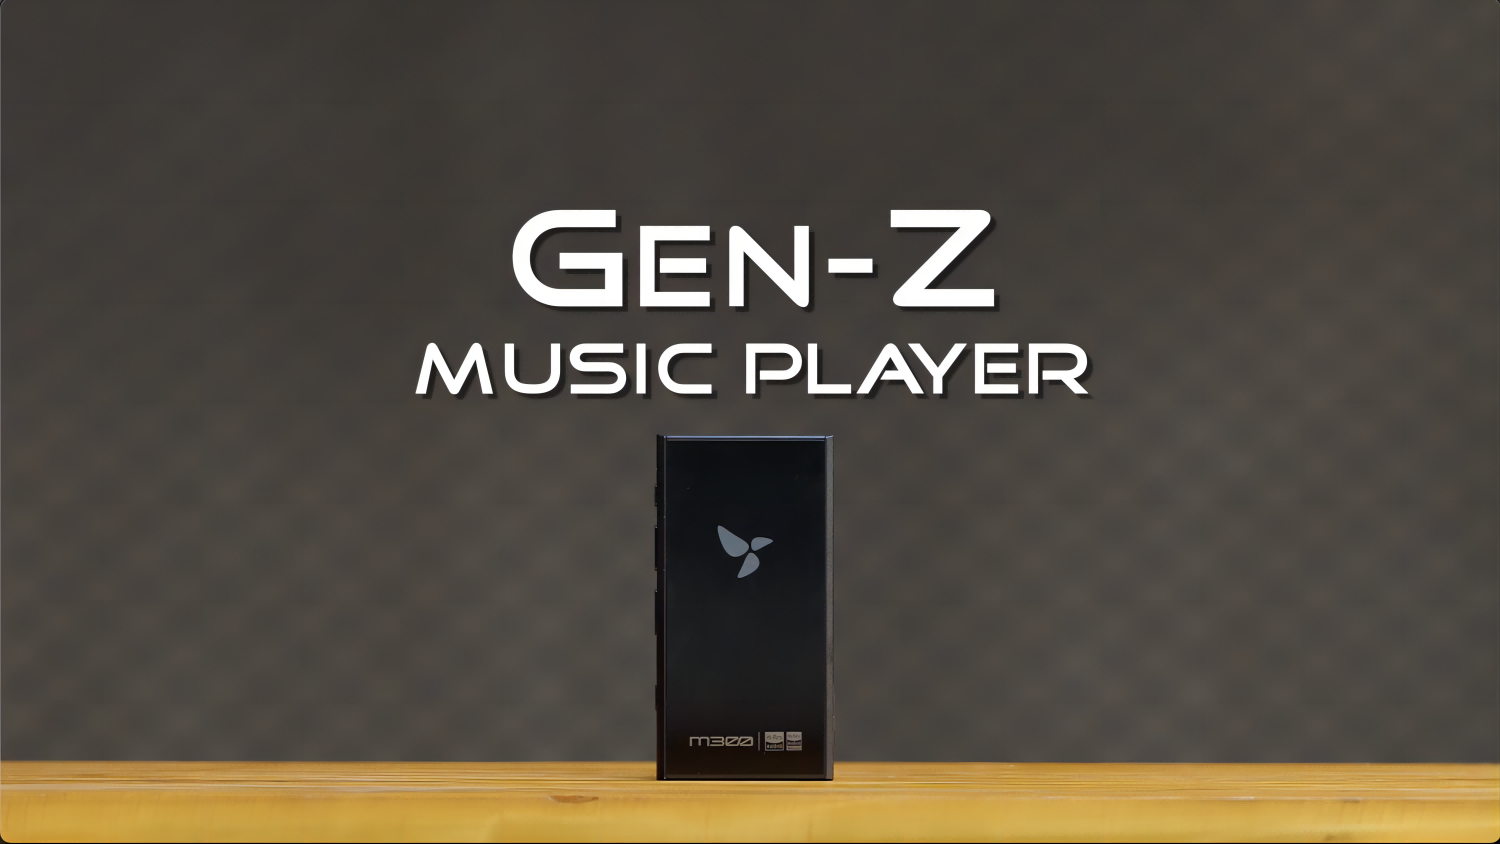 Load video: The Gen-Z music player